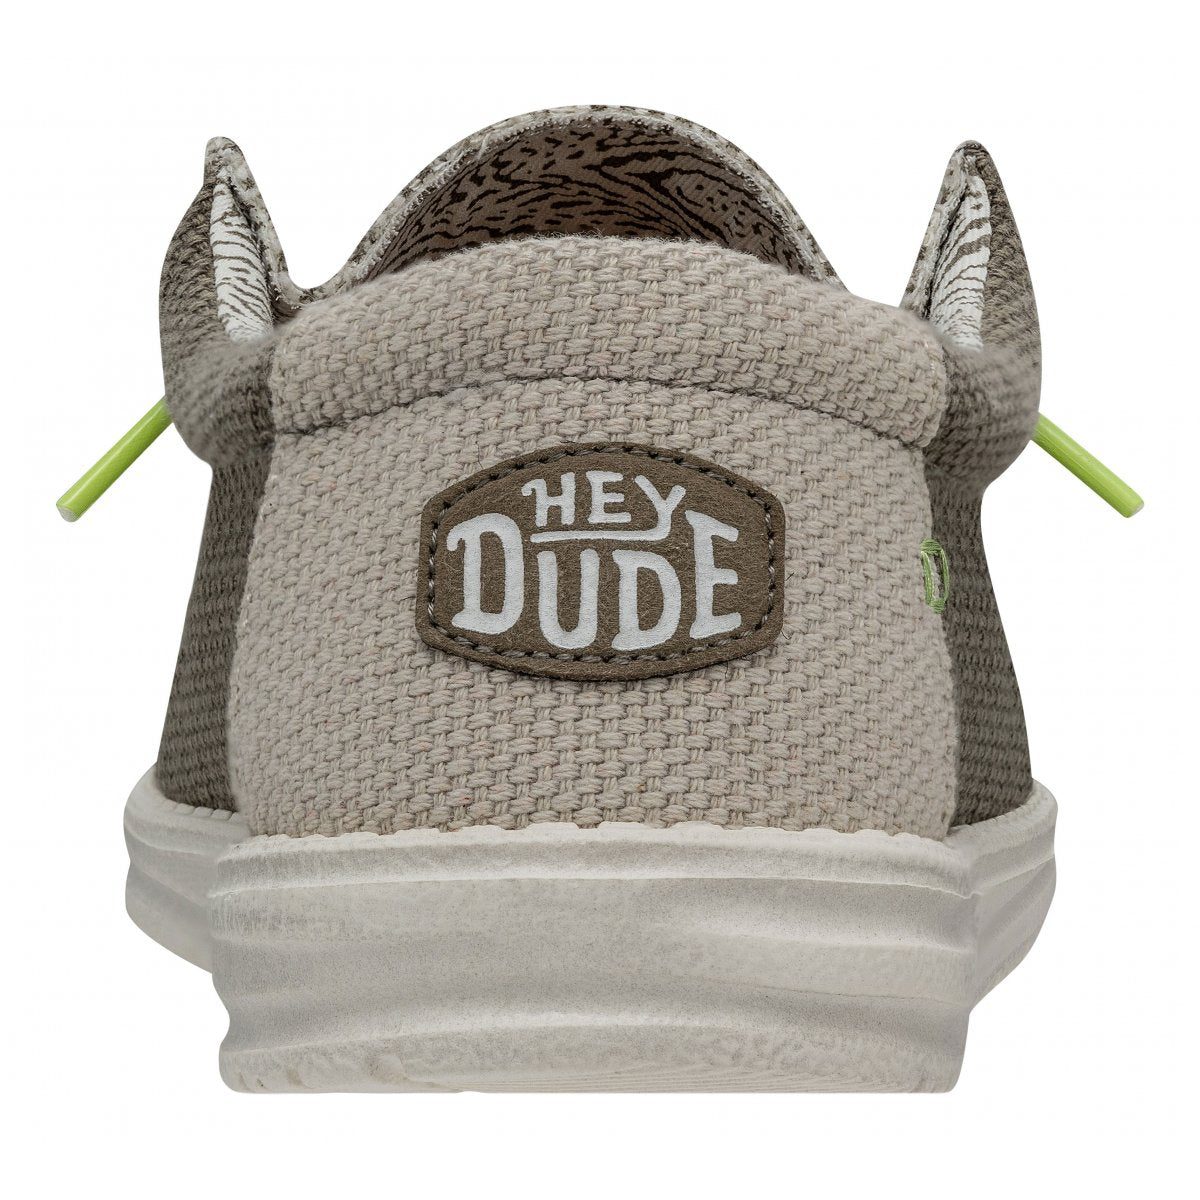 Dude-HD.S23.40003-2BS-wally-braided-fossil-5